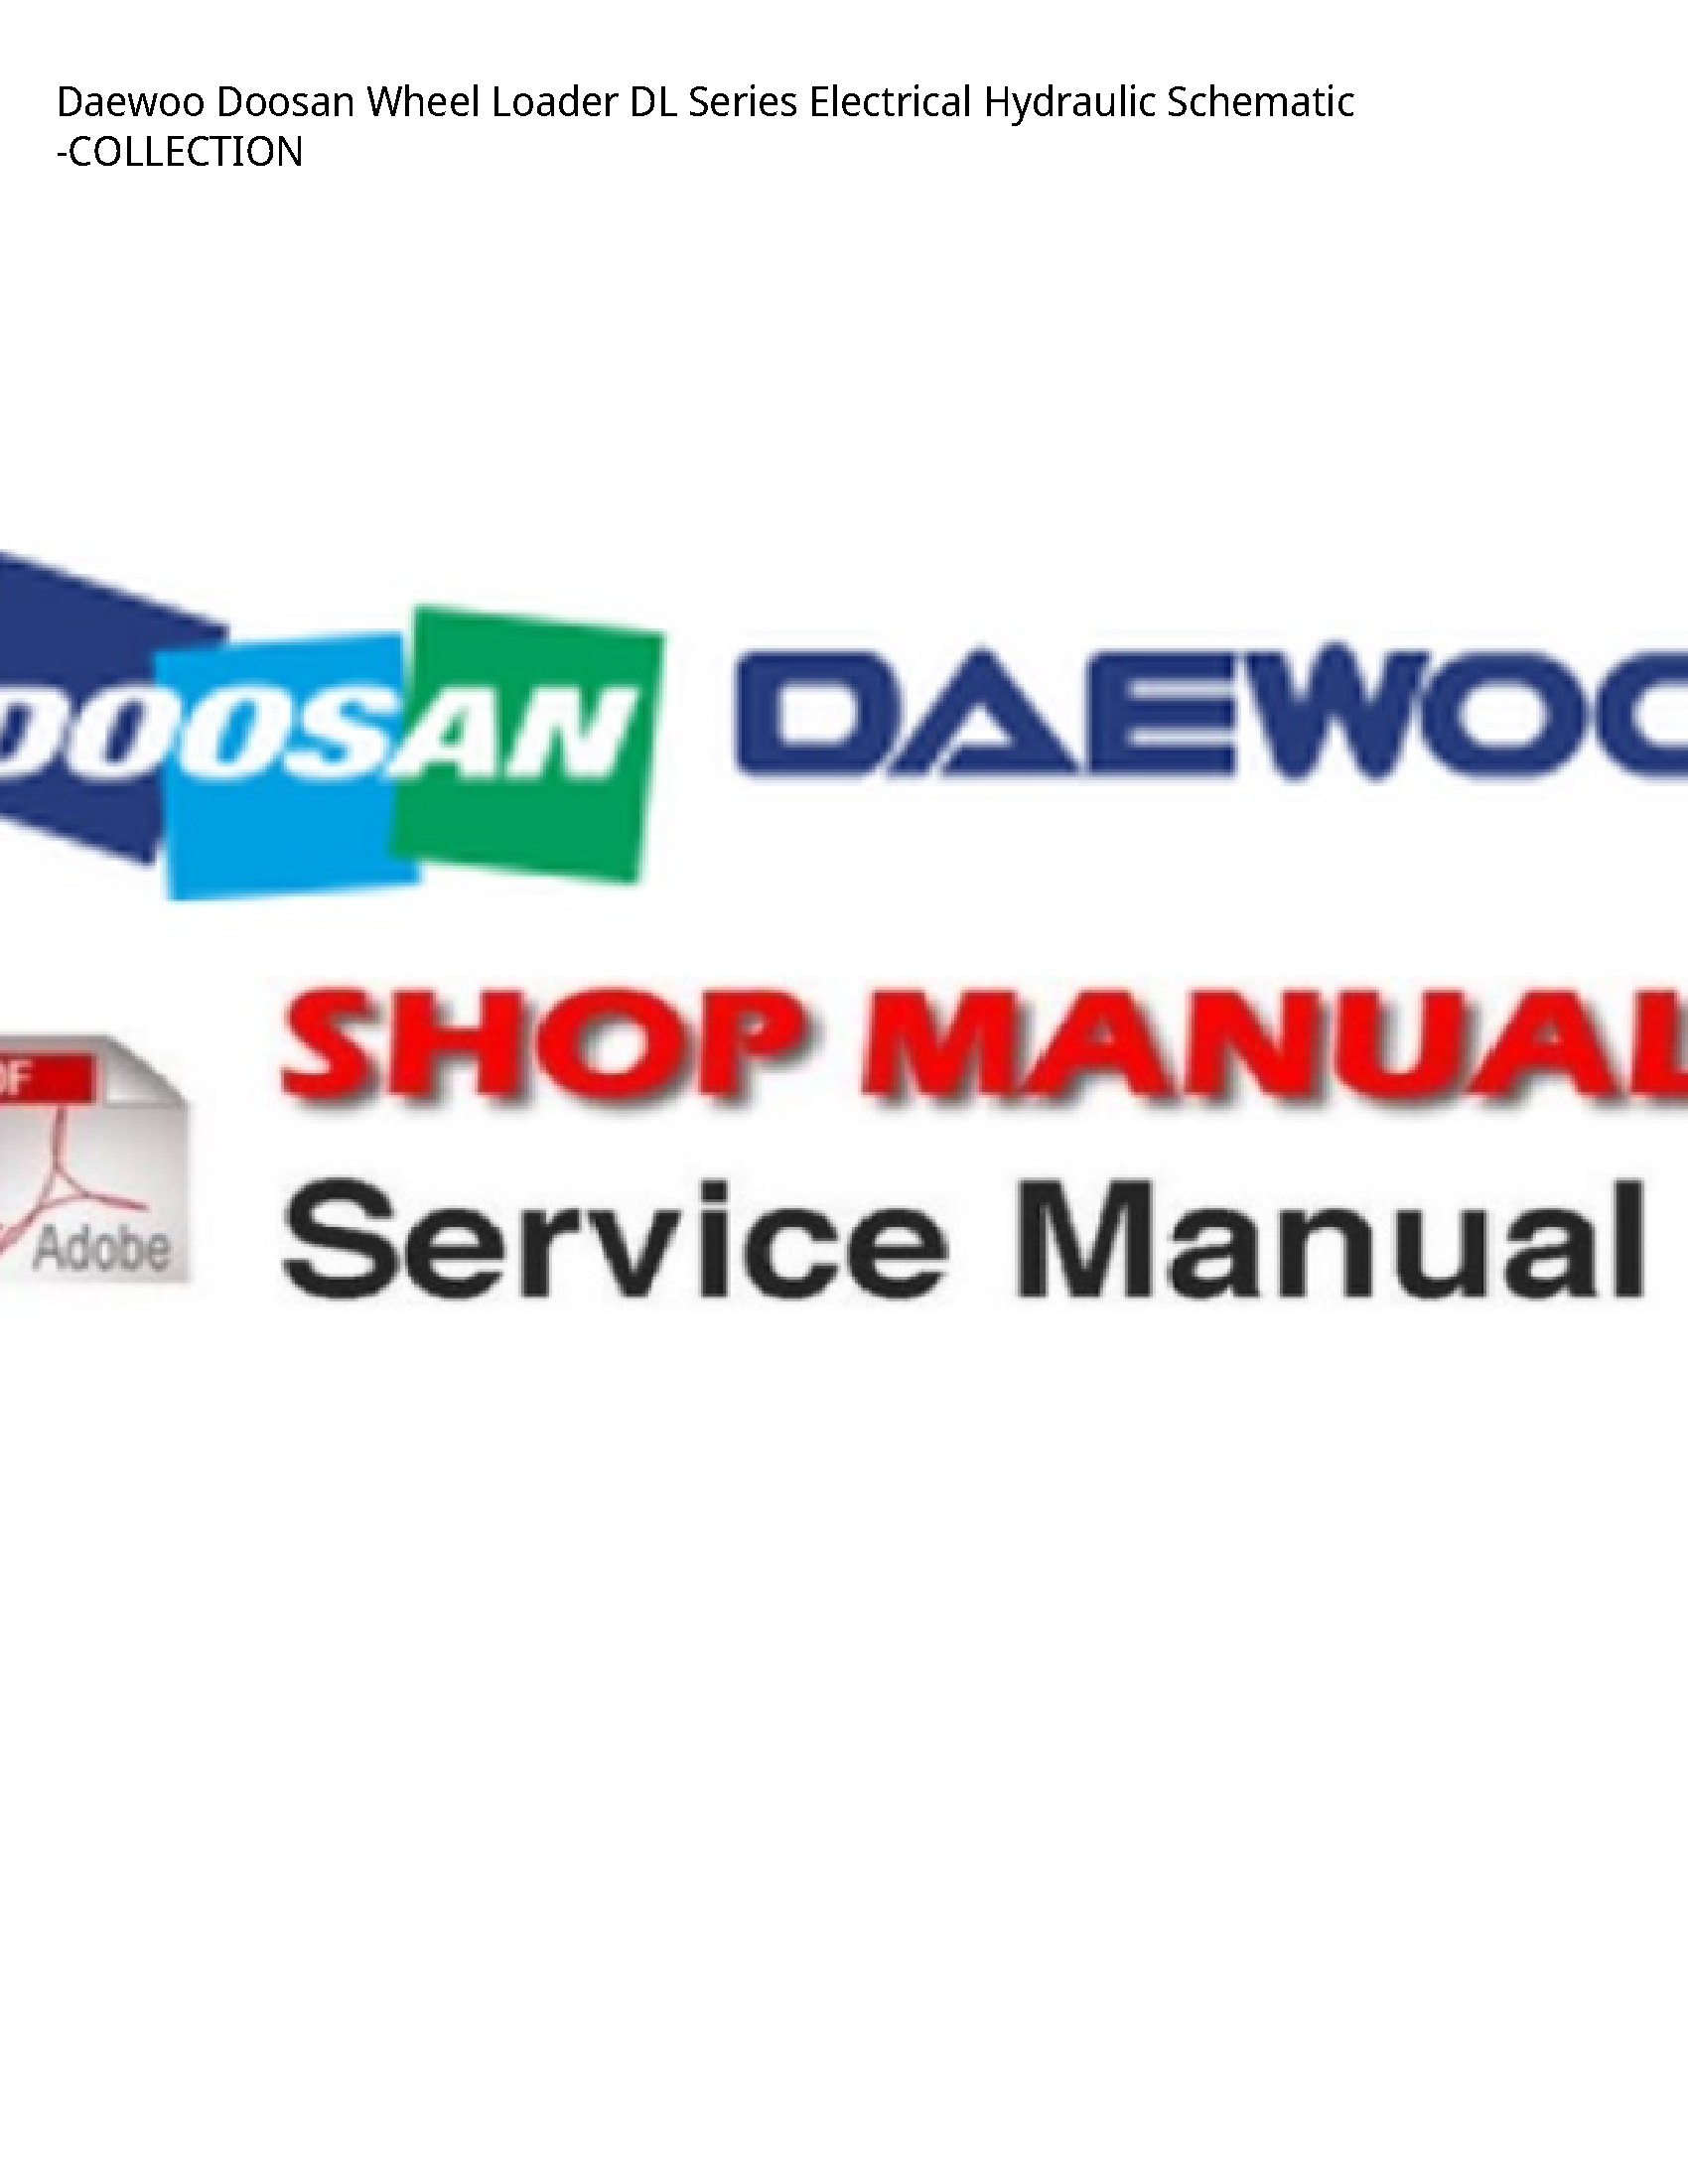 Daewoo Doosan Wheel Loader DL Series Electrical Hydraulic Schematic -COLLECTION manual